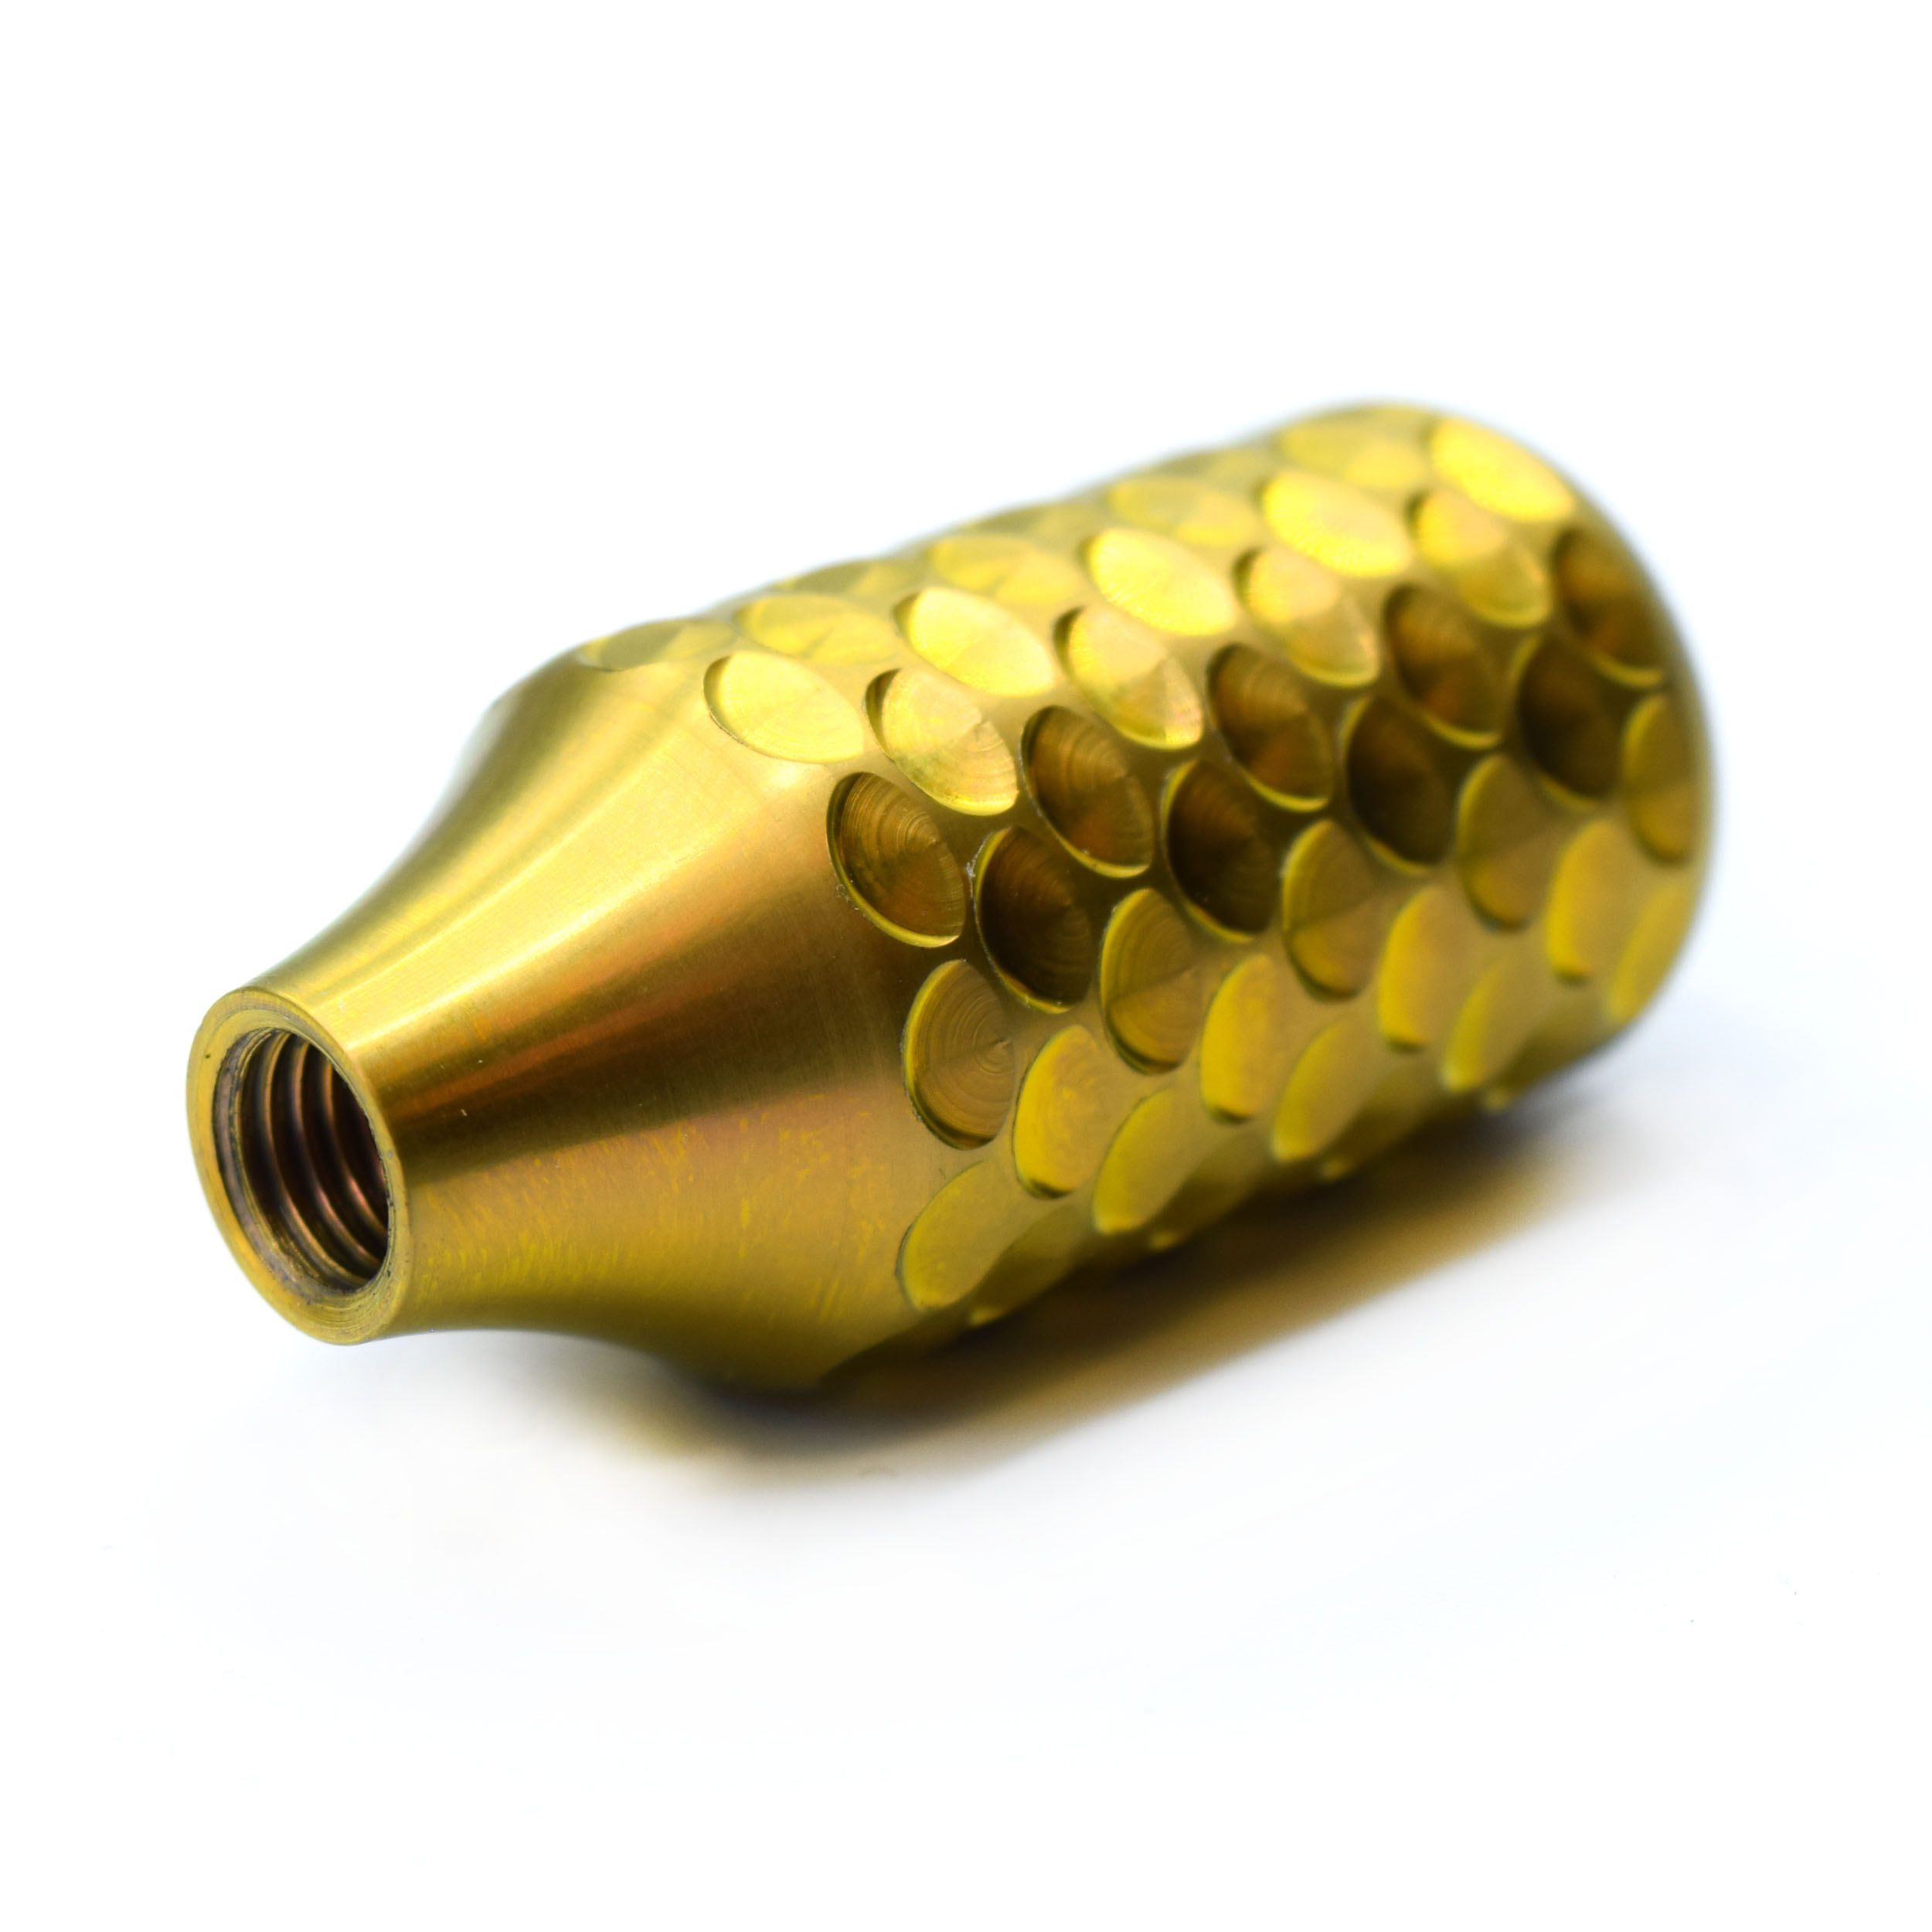 GOLD Titanium Dragon Scale Bolt Knob - LIMITED EDITION Questions & Answers